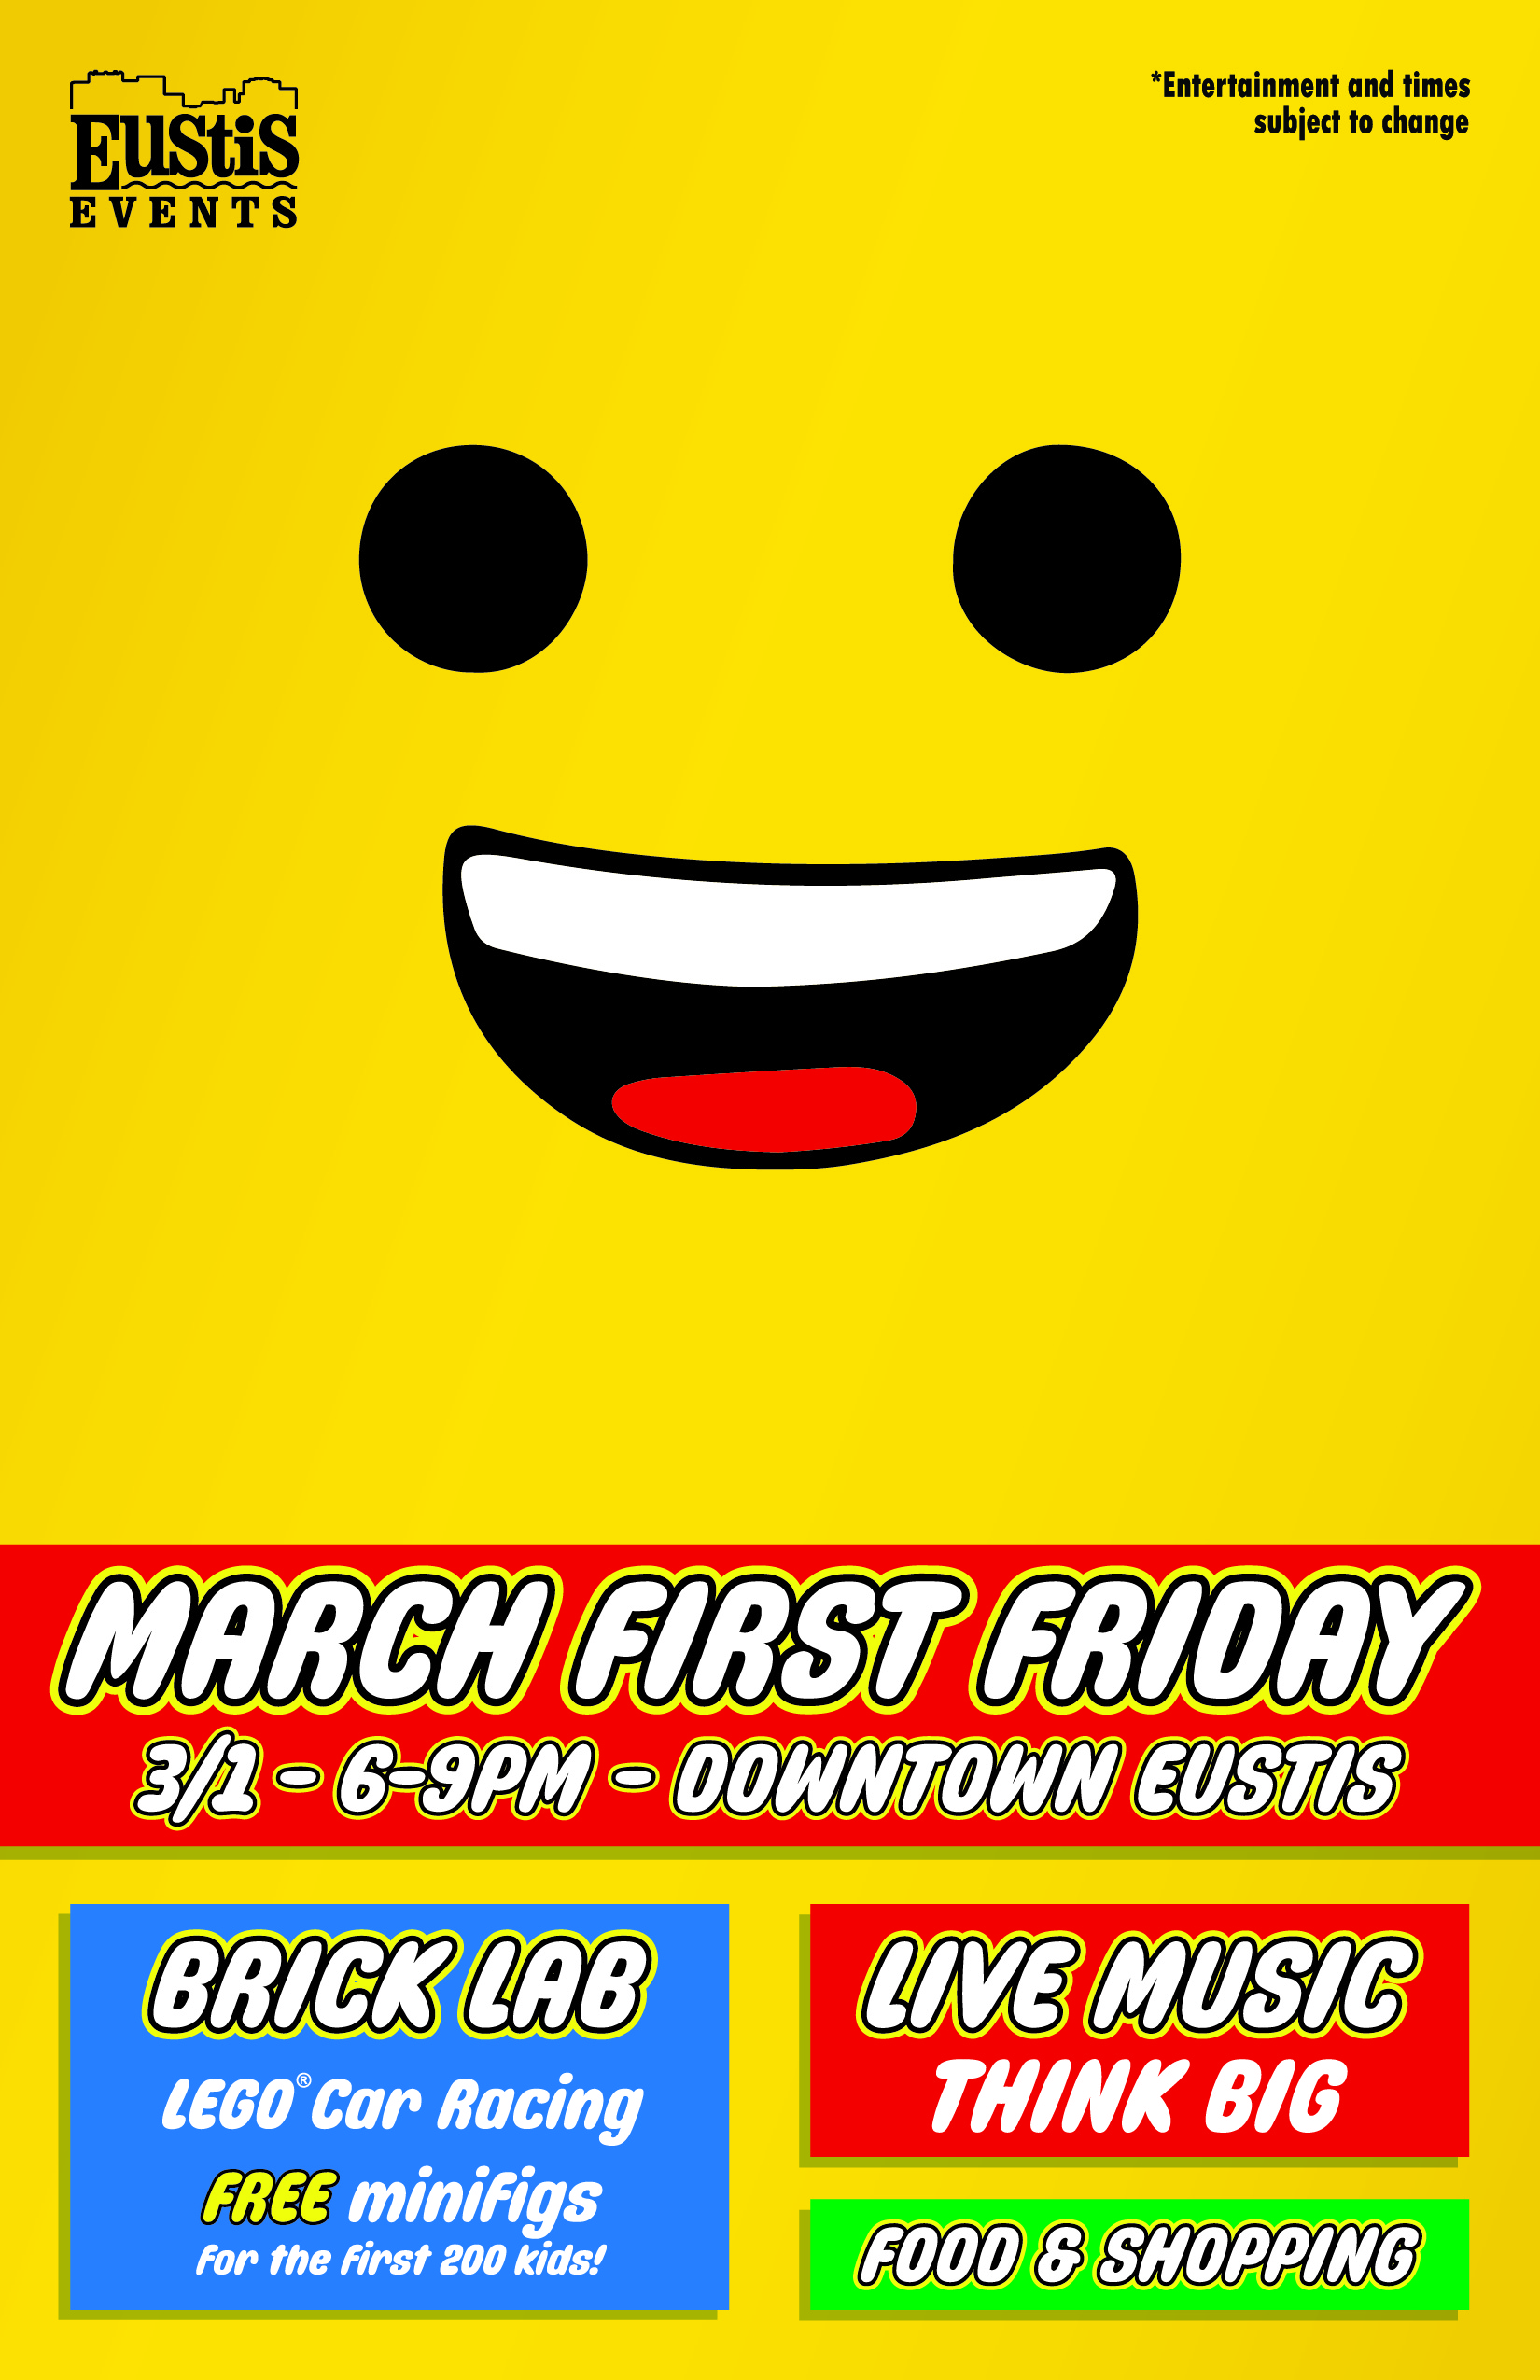 March First Friday is on March 1st